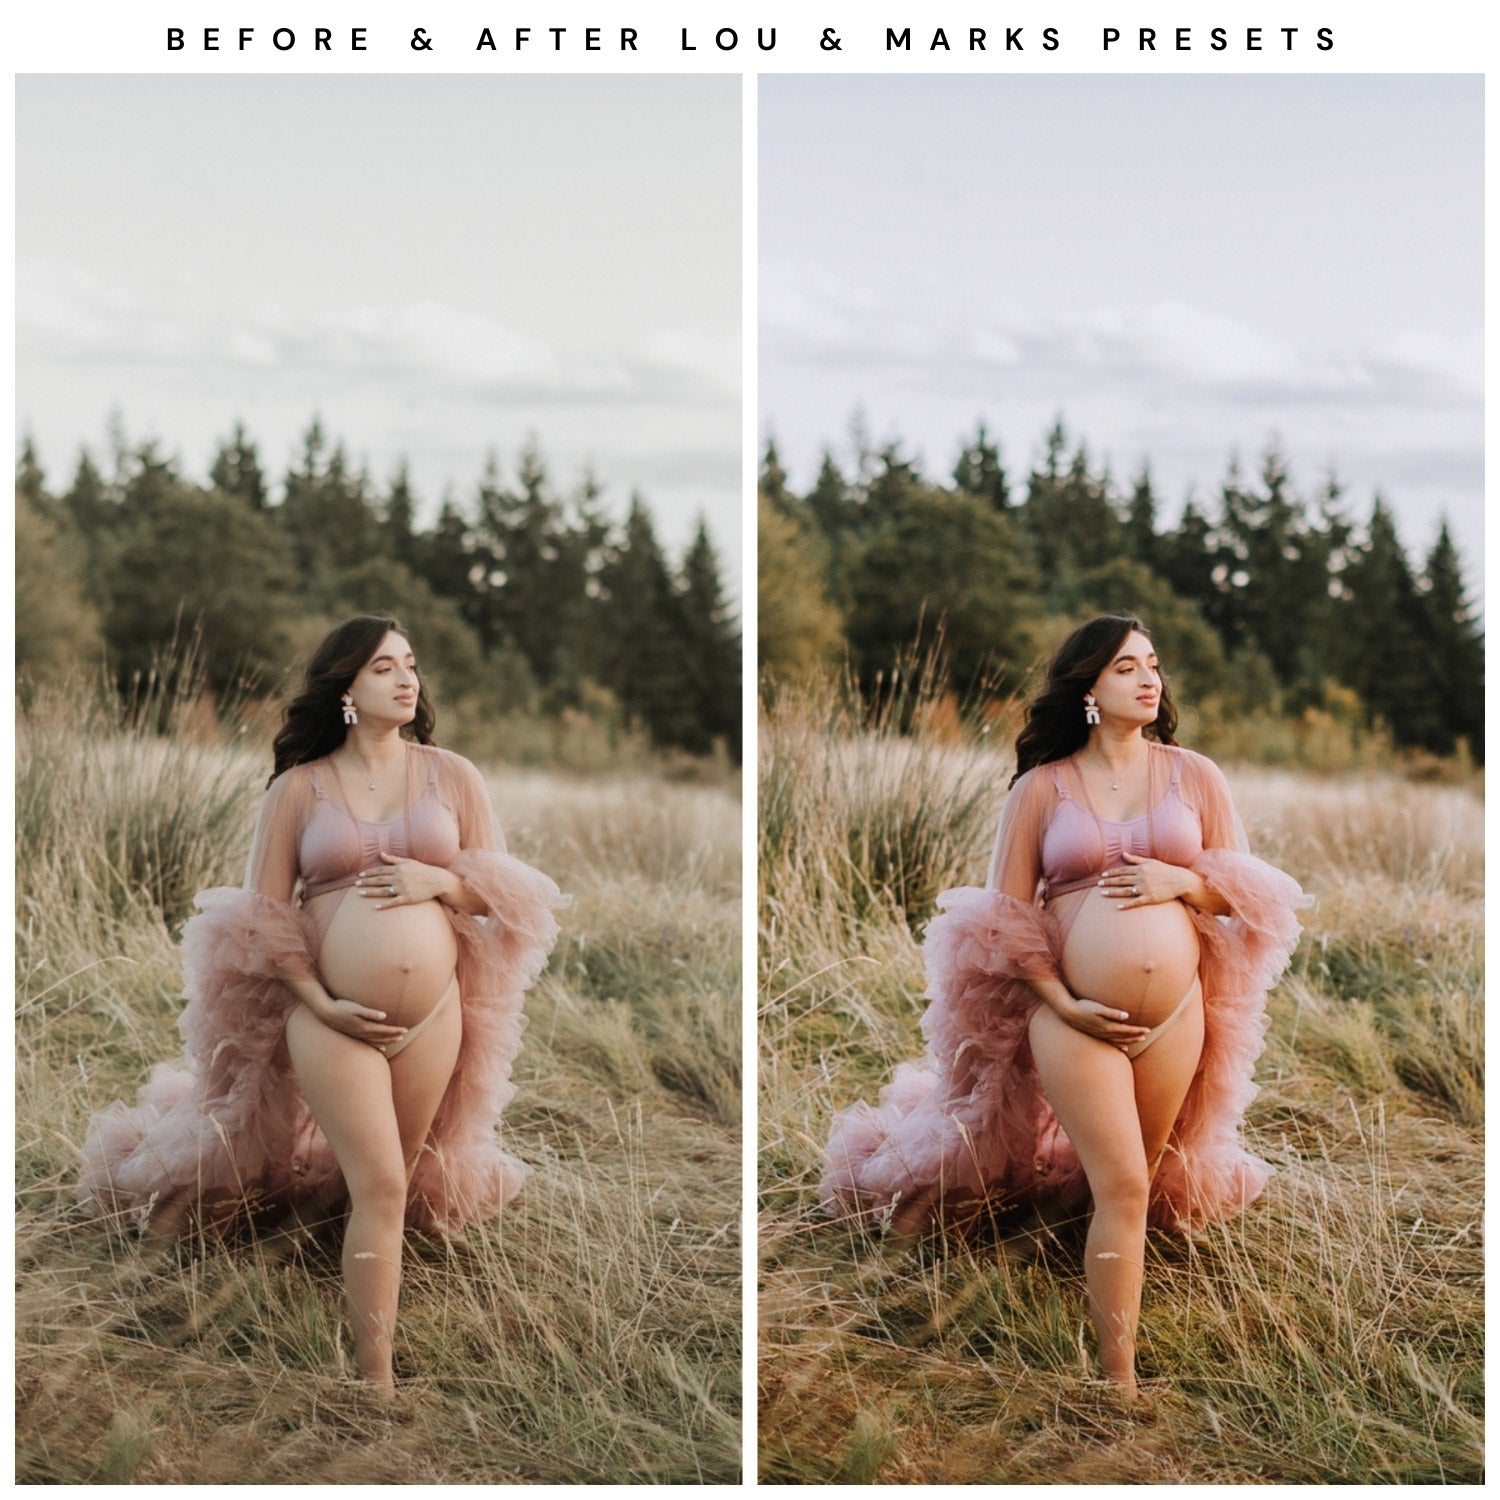 Lou And Marks Presets Moody Lightroom Presets Bundle The Best Moody Presets Maternity